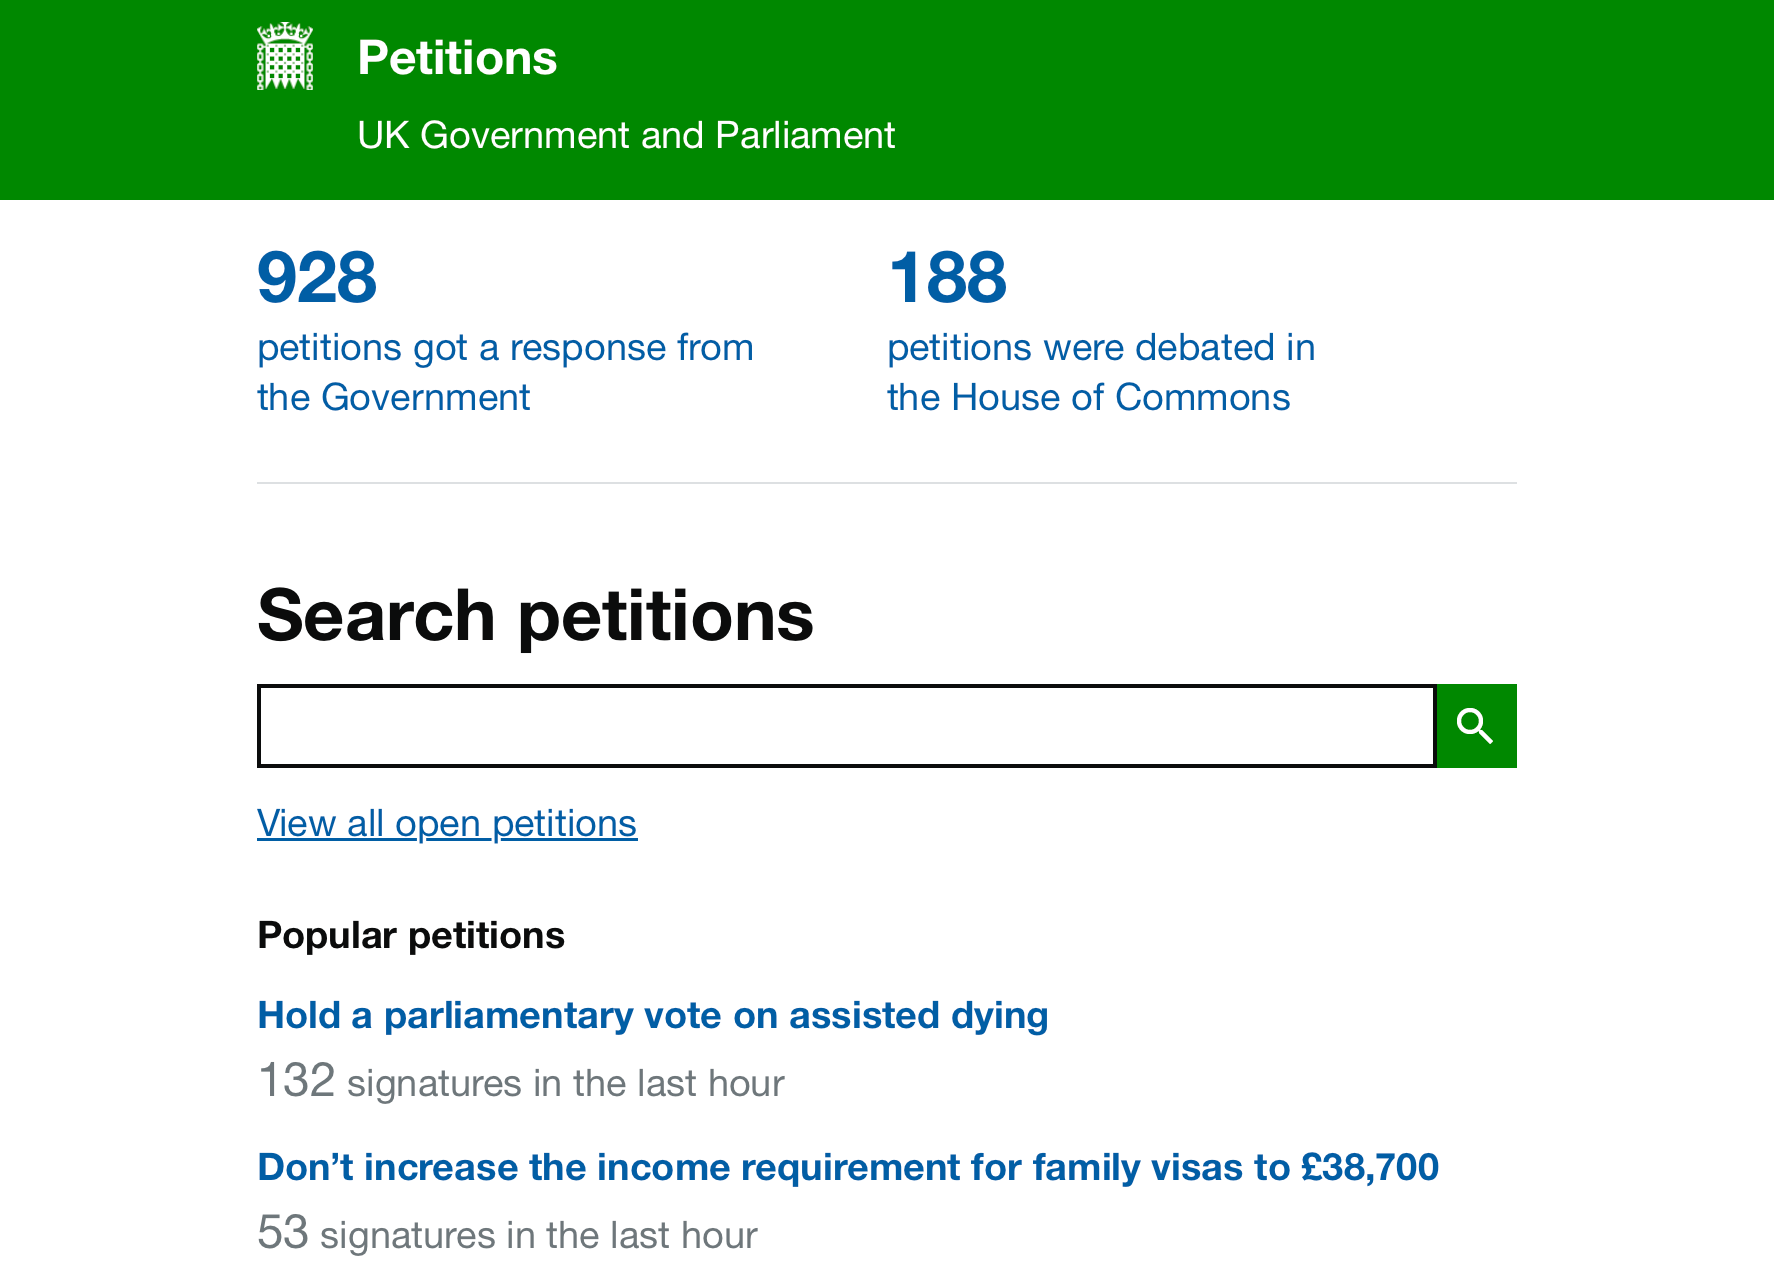 Screenshot. Petitions – UK Government and Parliament. 928 petitions got a response from the Government. 188 petitions were debated in the House of Commons. Search petitions. View all open petitions. Popular petitions. Hold a parliamentary vote on assisted dying. 132 signatures in the last hour. Don’t increase the income requirement for family visas to £38,700. 53 signatures in the last hour